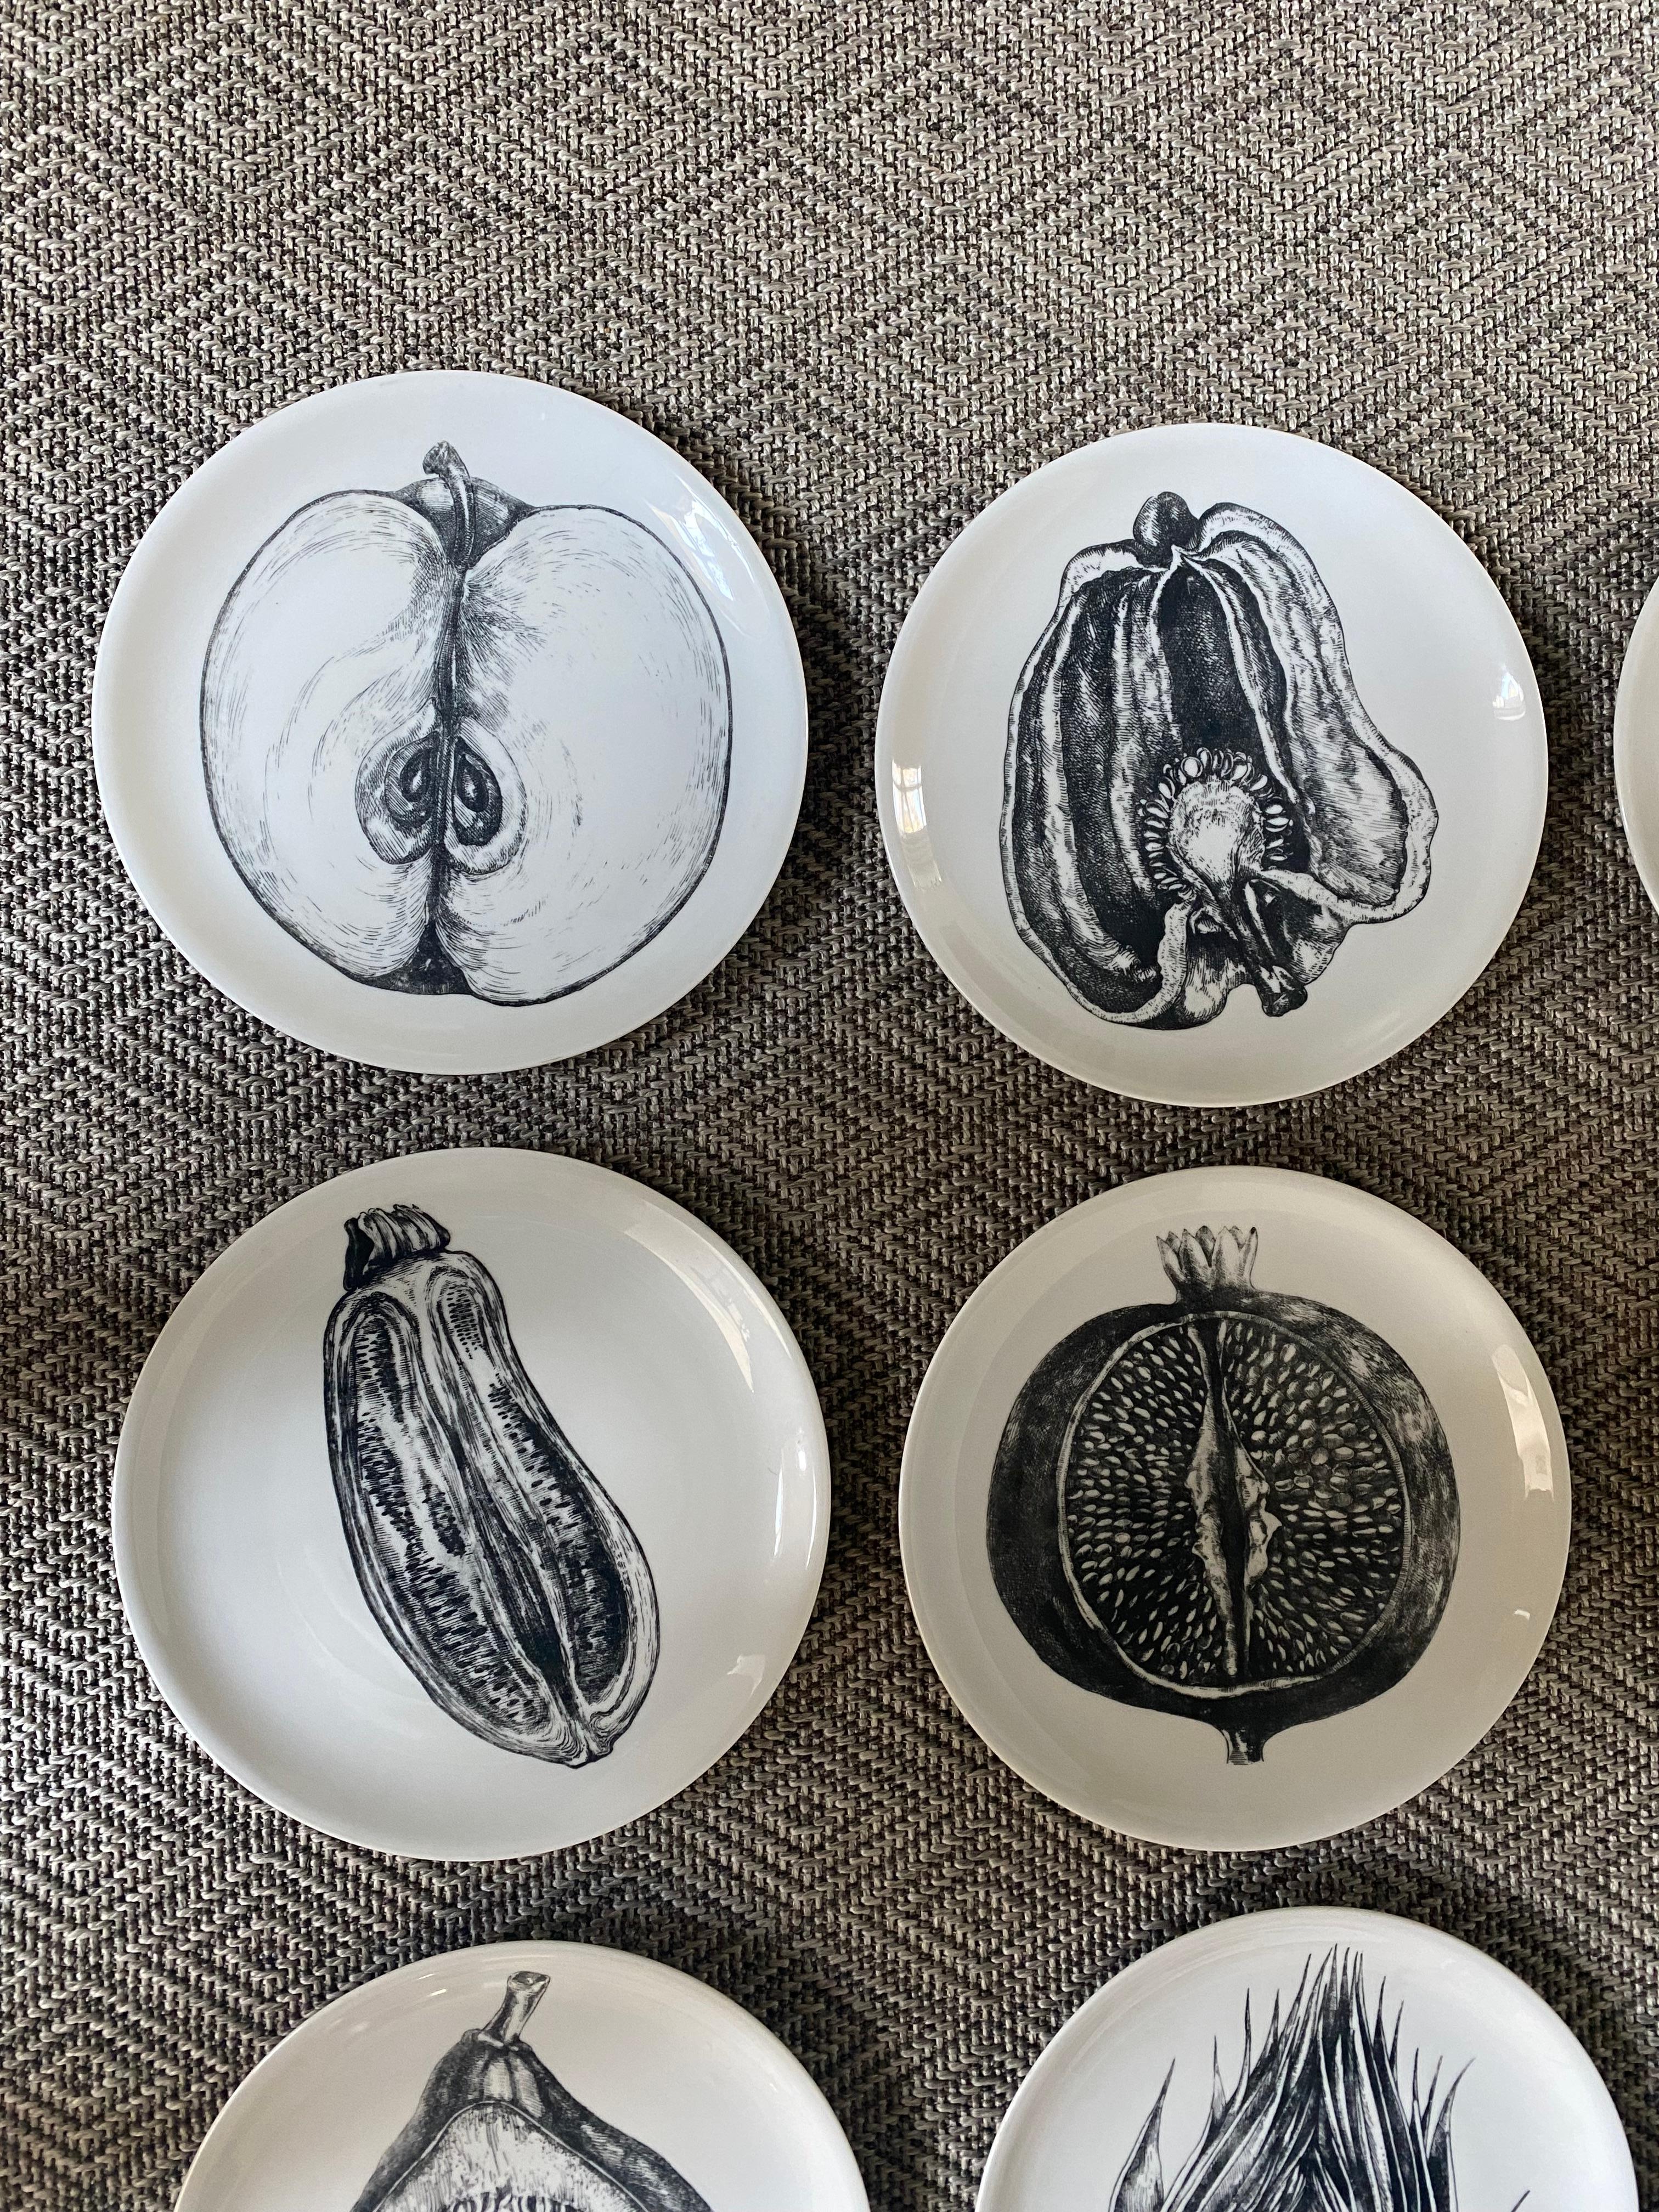 Set of 12 black and white transfer printed fruit and vegetable motif plates.
Designed by Fornasetti in Italy.